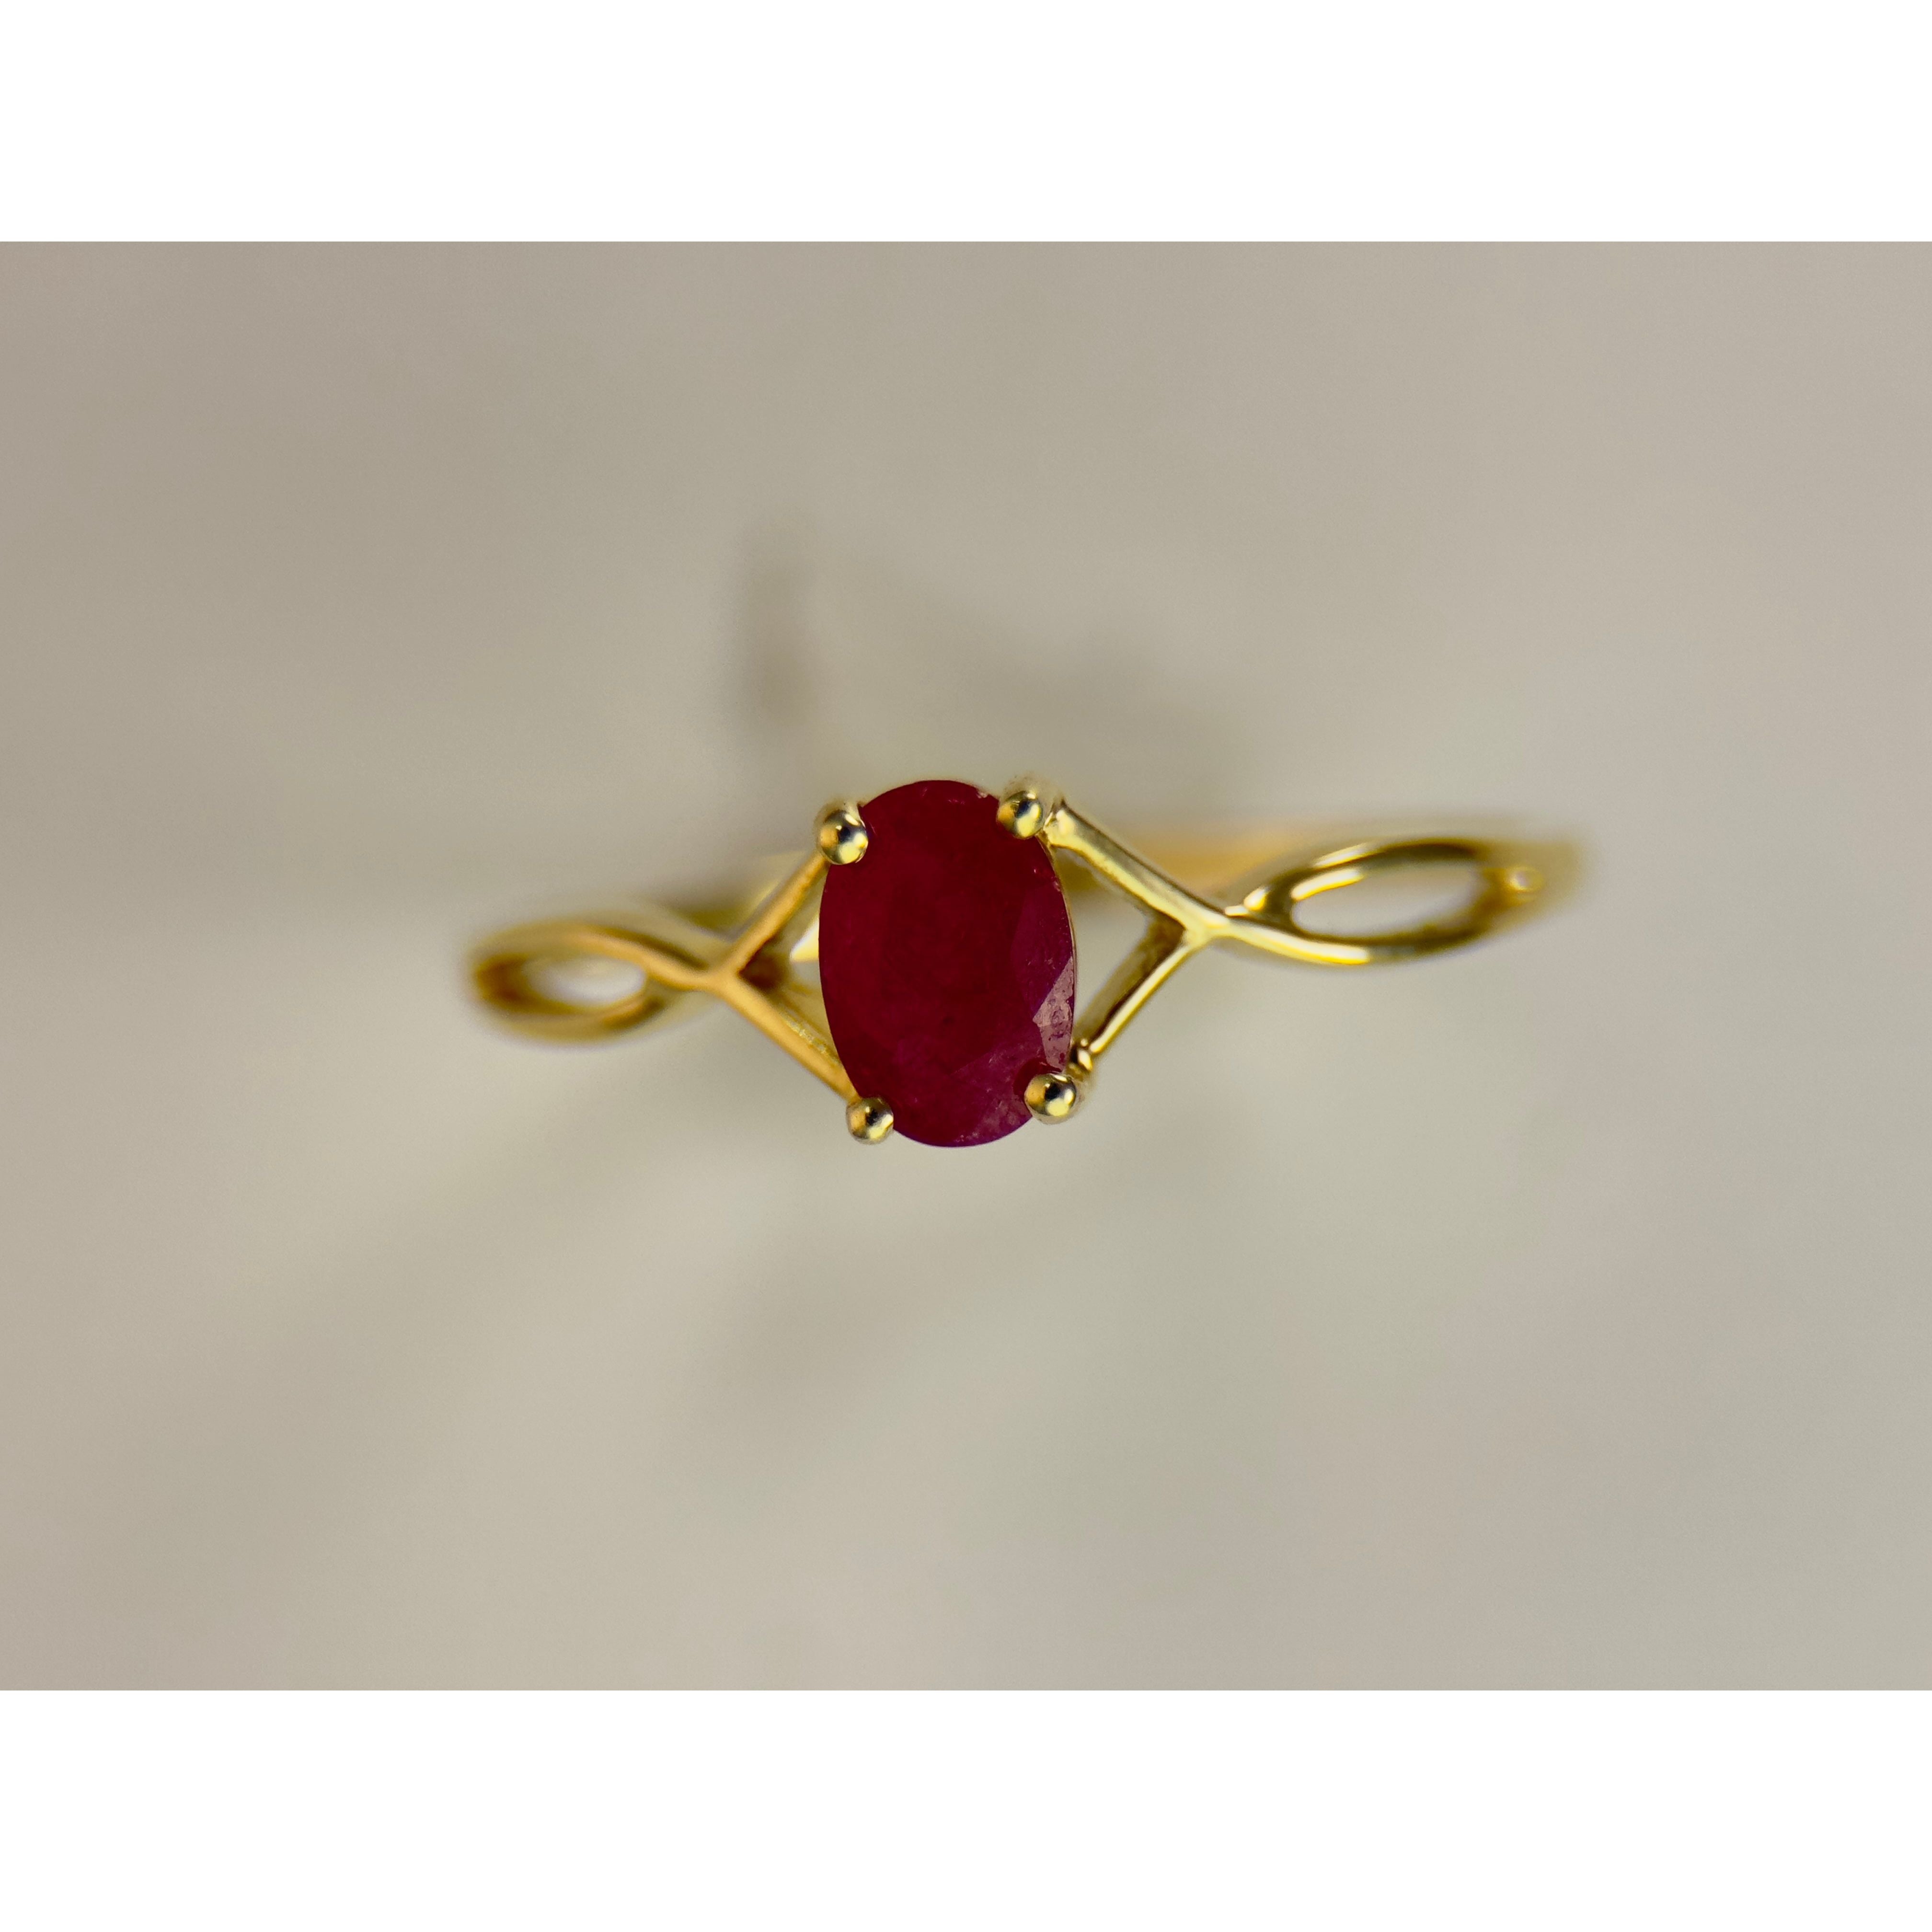 DR2010 - 14K Yellow Gold - Ruby - Ladies Gold Rings